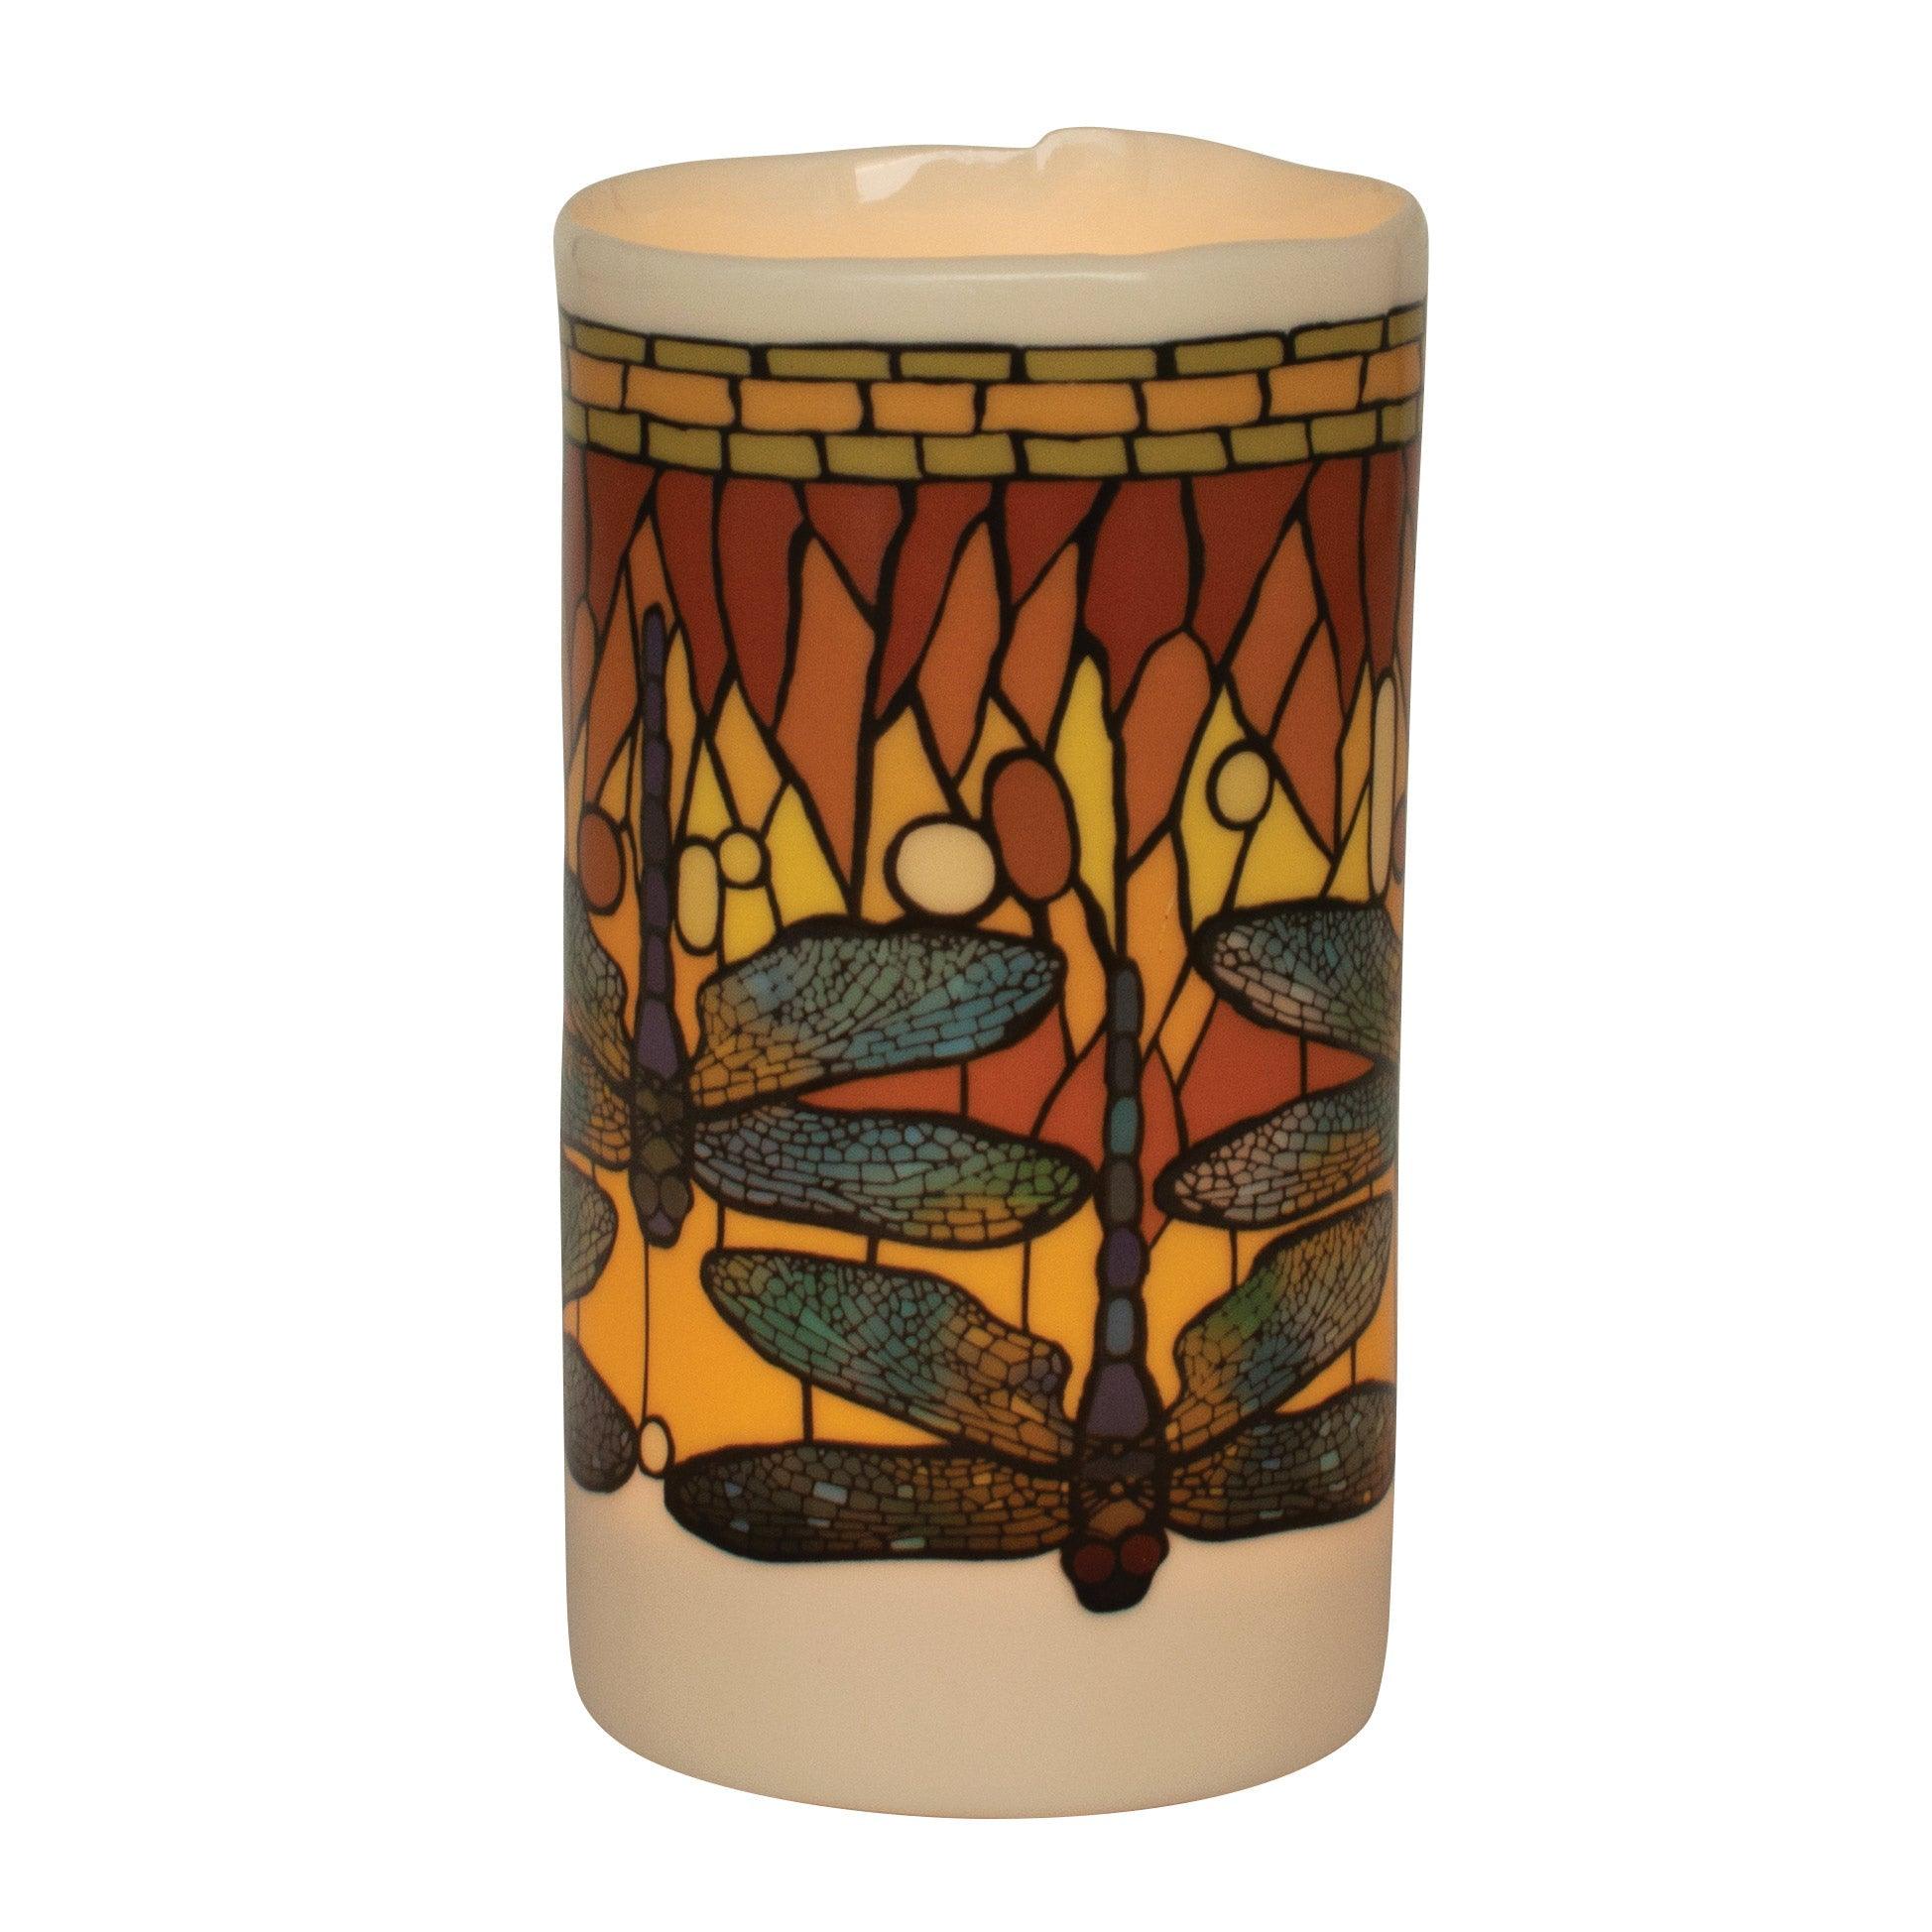 Product photo of Dragonfly Transforming Tealight Holder, a novelty gift manufactured by The Unemployed Philosophers Guild.